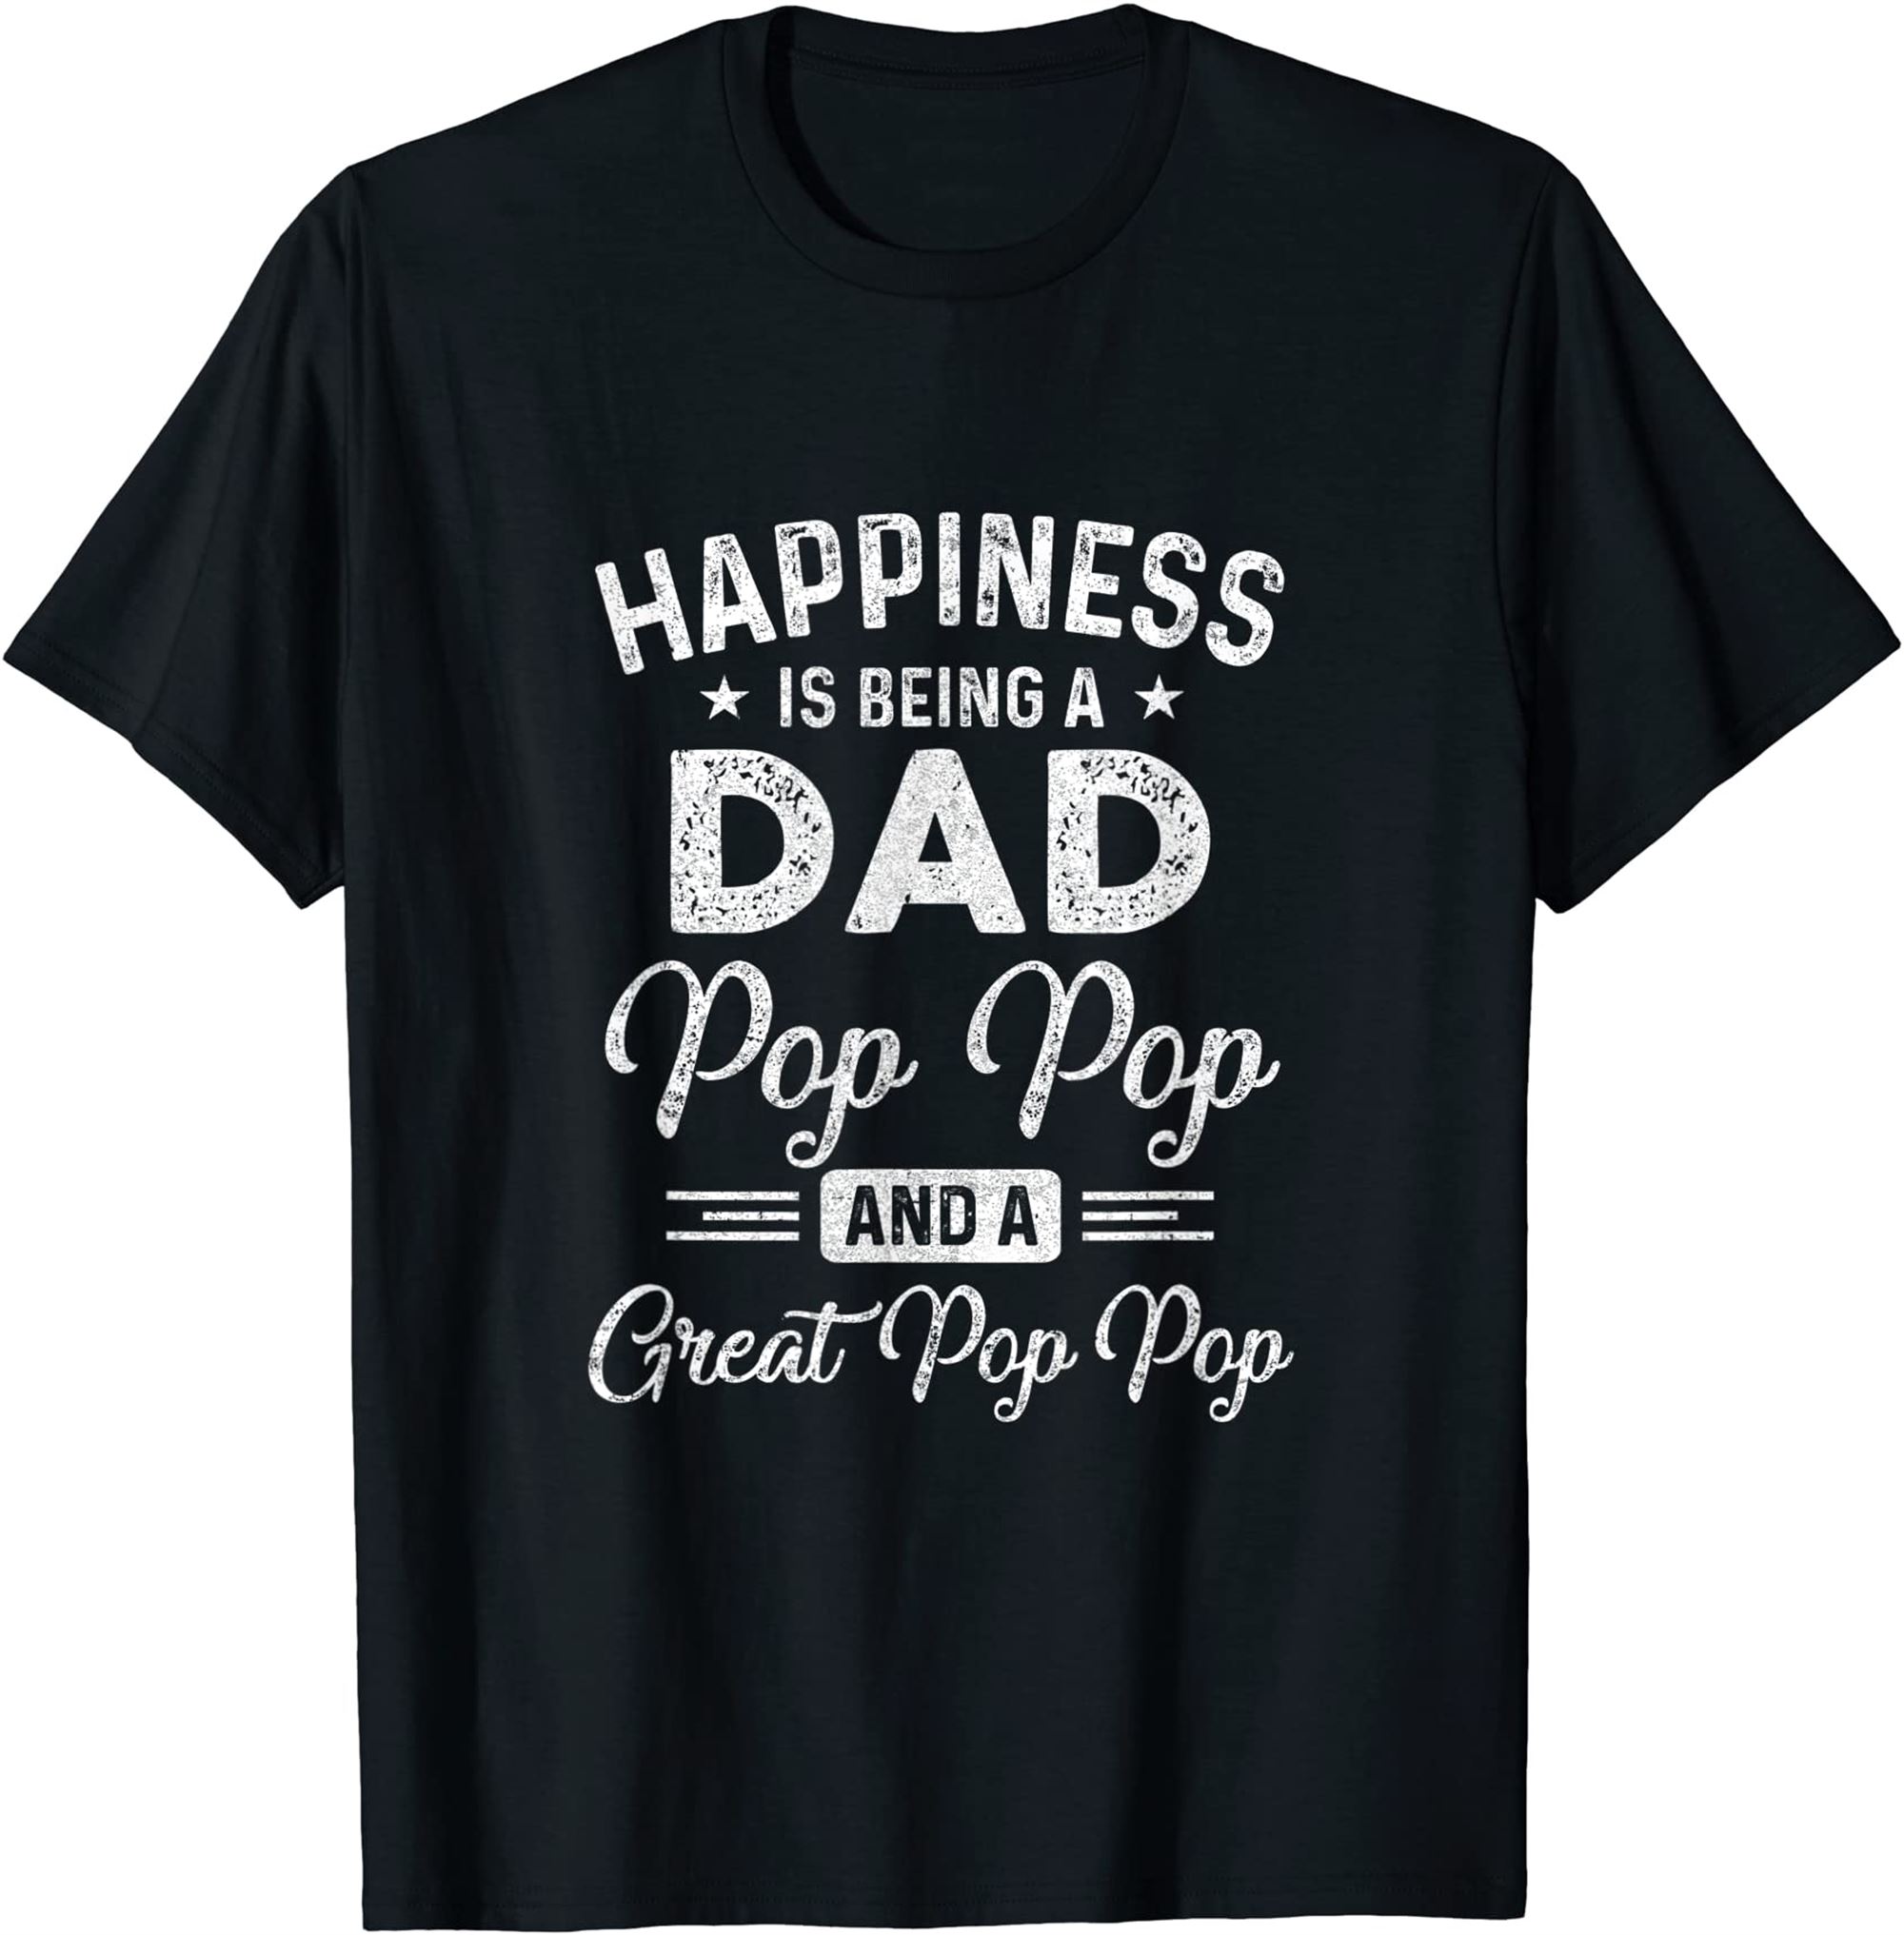 Happiness Is Being A Dad Pop Pop And Great Pop Pop T-shirt Full Size Up To 5xl